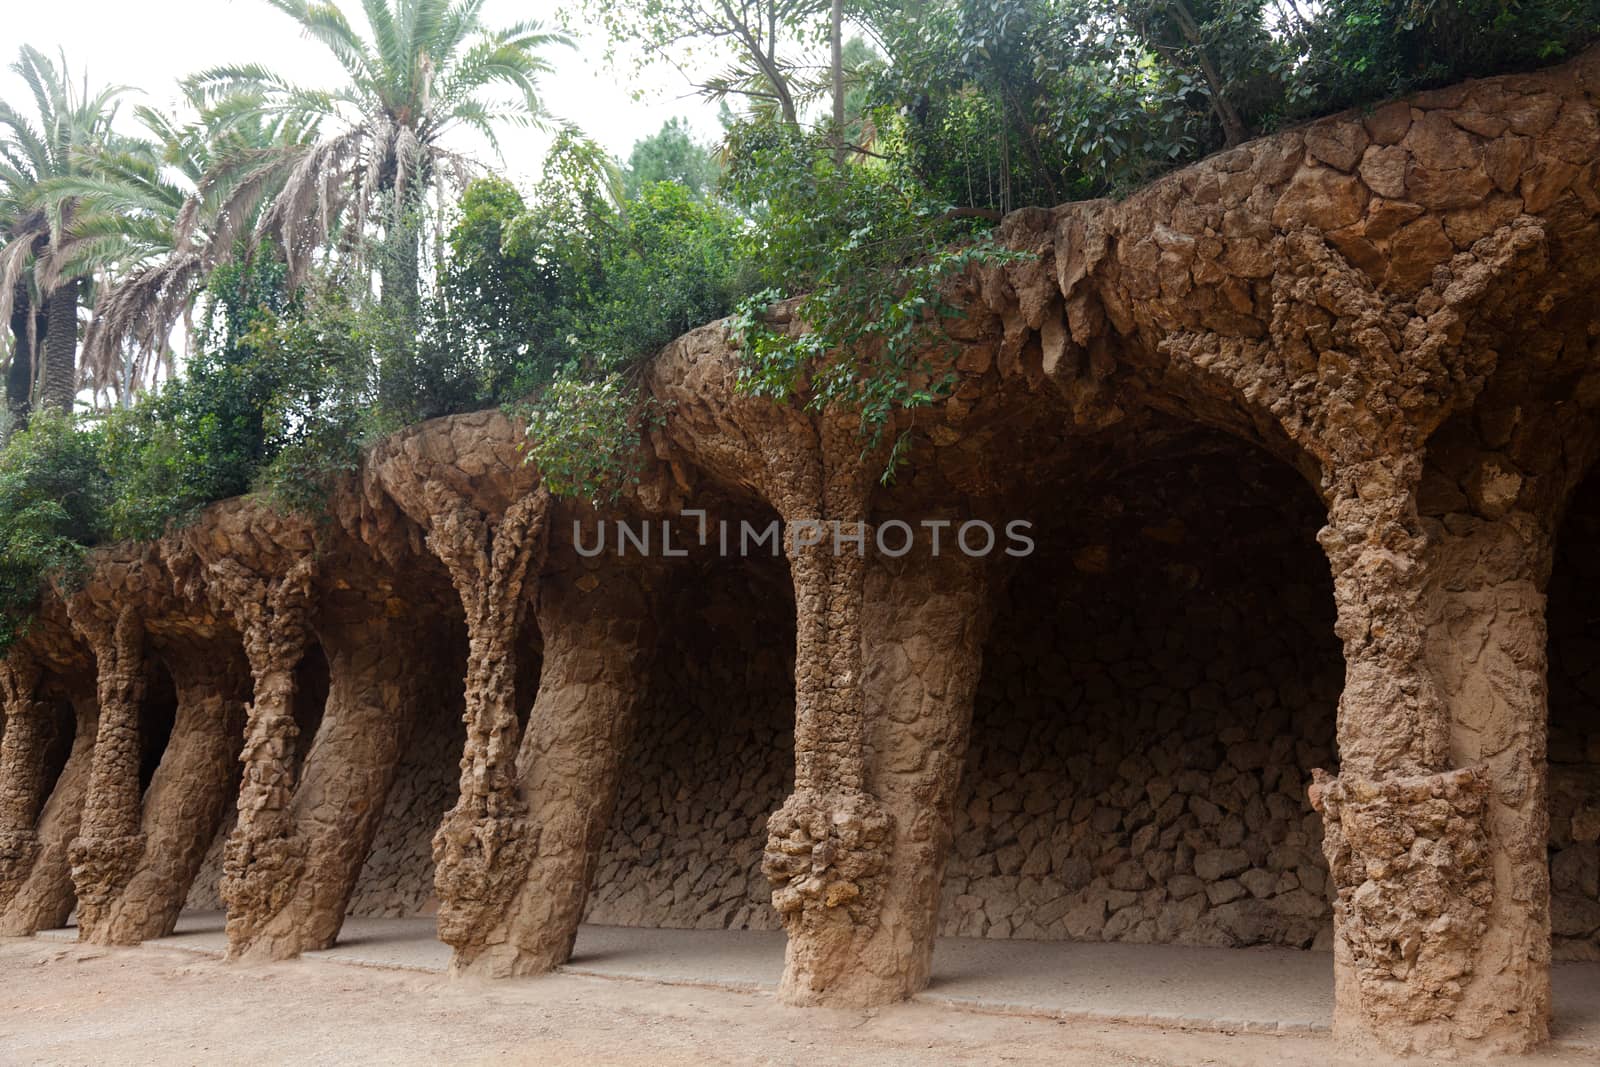 Park Guell in Barcelona - Spain